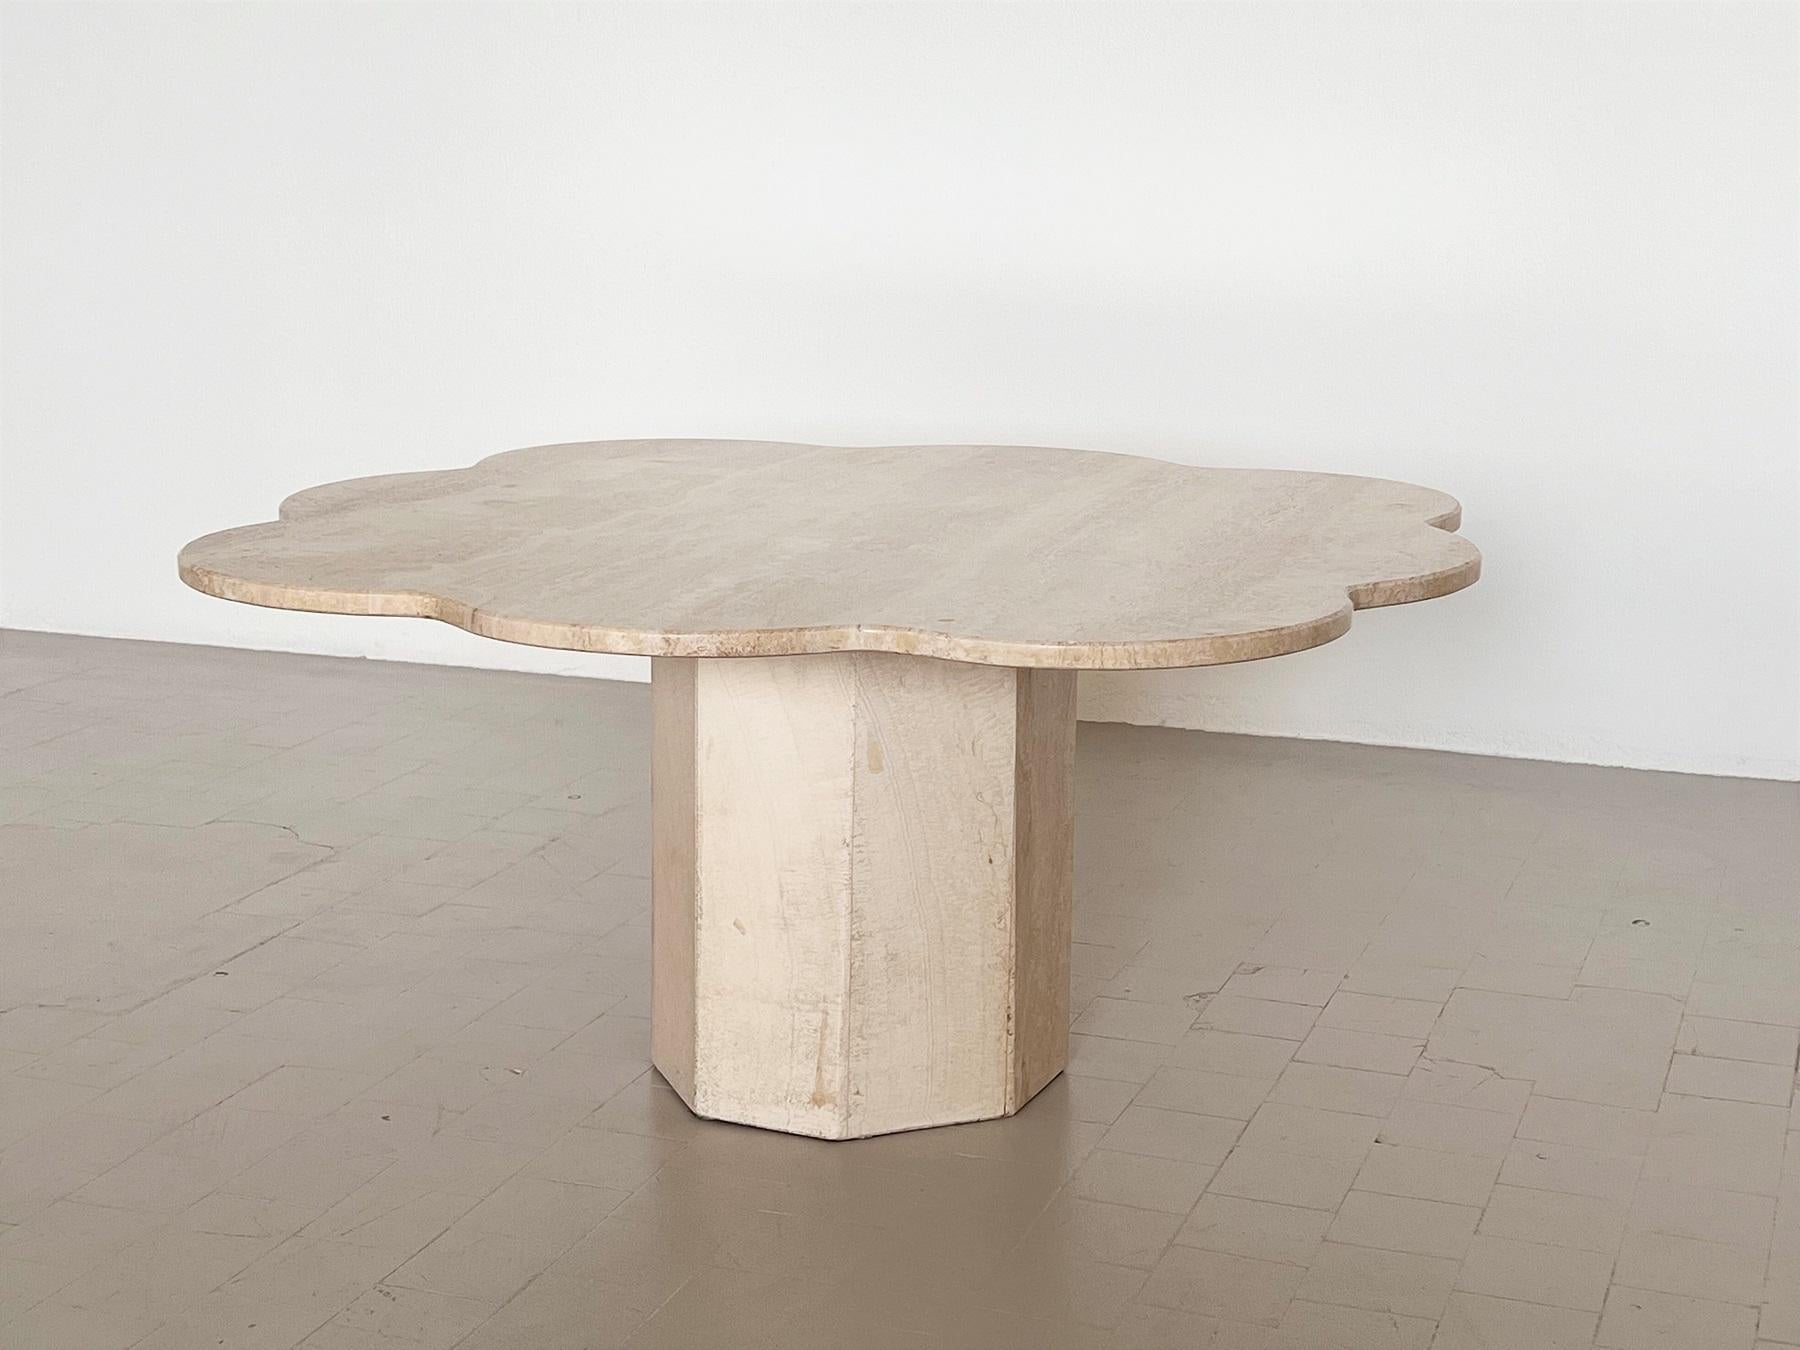 Italian Midcentury Coffee Table in Travertine Stone and Cloud Shape, 1970s 2